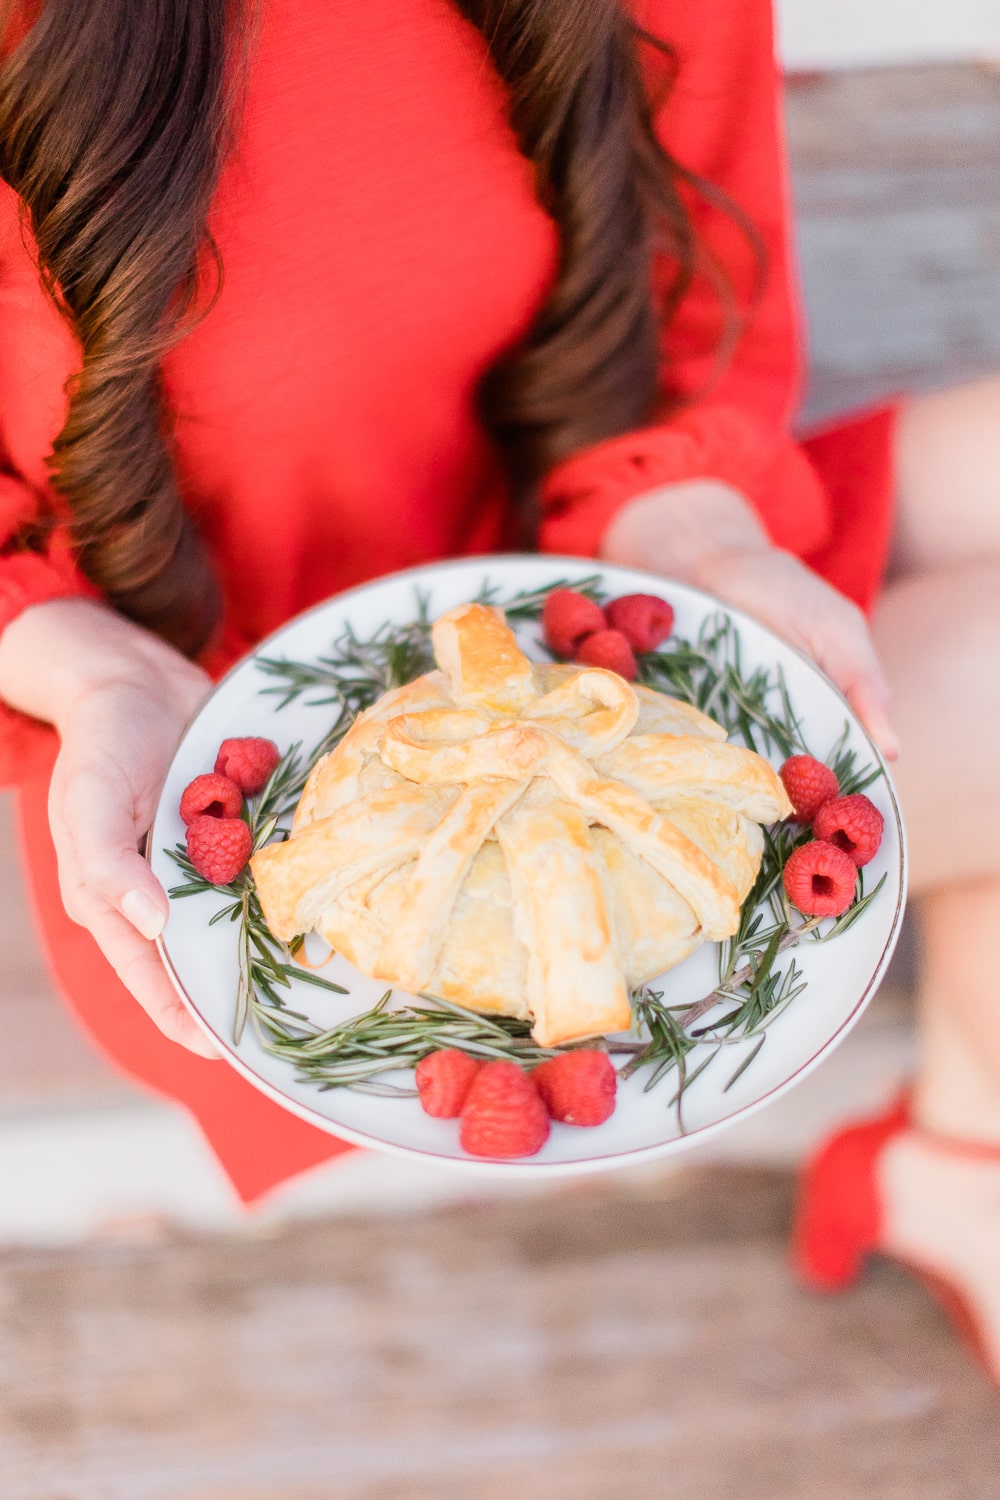 Raspberry baked brie recipe created by blogger Stephanie Ziajka on Diary of a Debutante